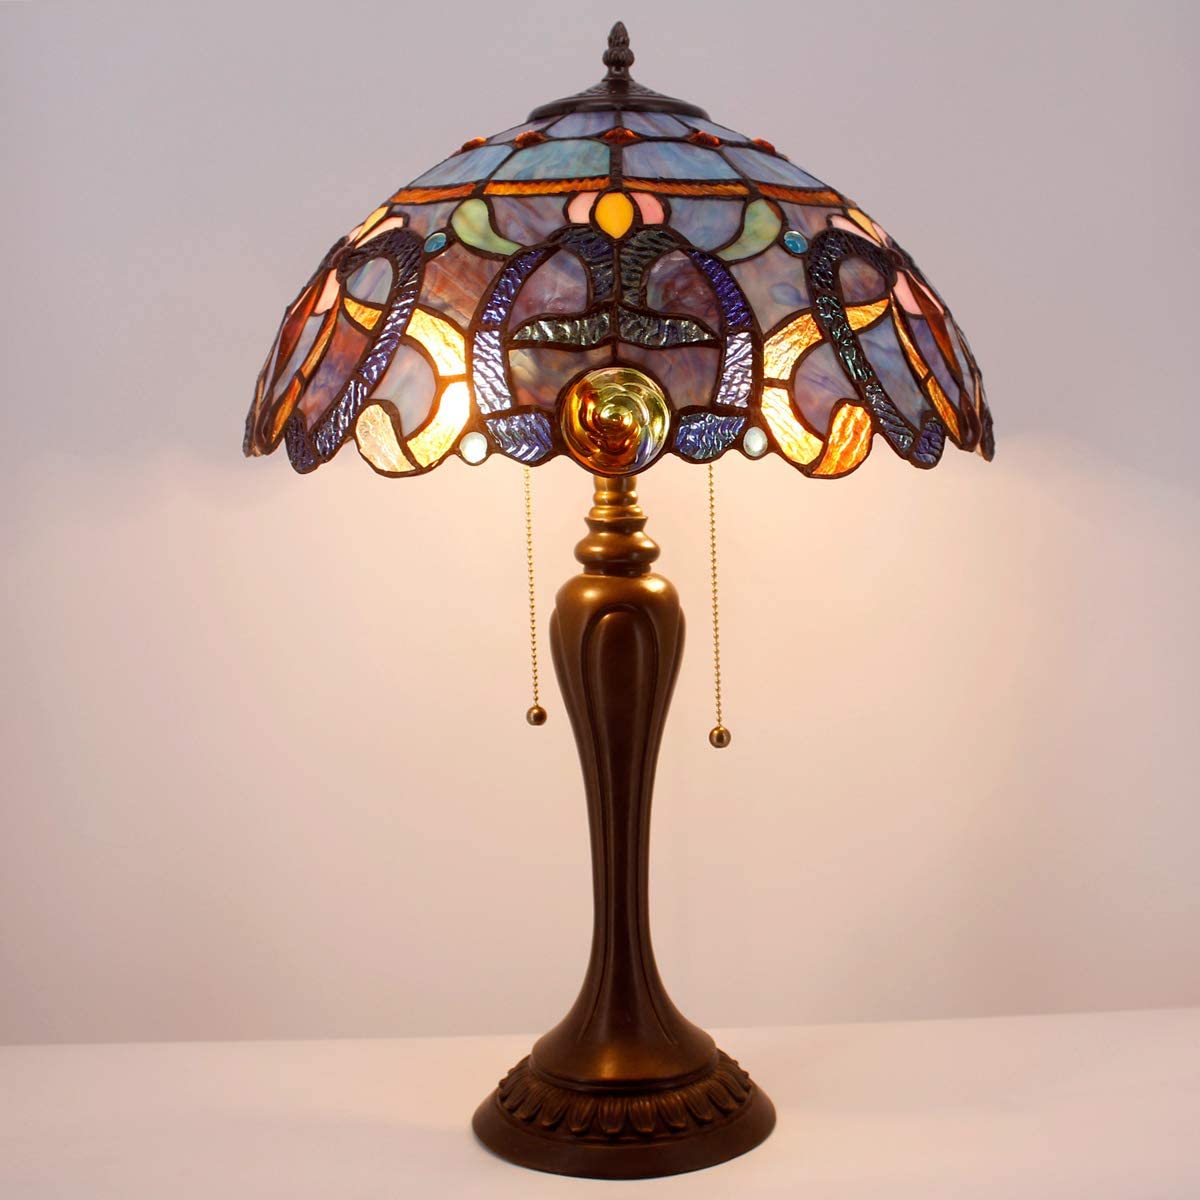 GEDUBIUBOO  Lamp Blue Purple Cloud Stained Glass Style Table Lamp 16X16X24 Inches Desk Bedside Reading Light Metal Base Decor Bedroom Living Room  Office S558 Series